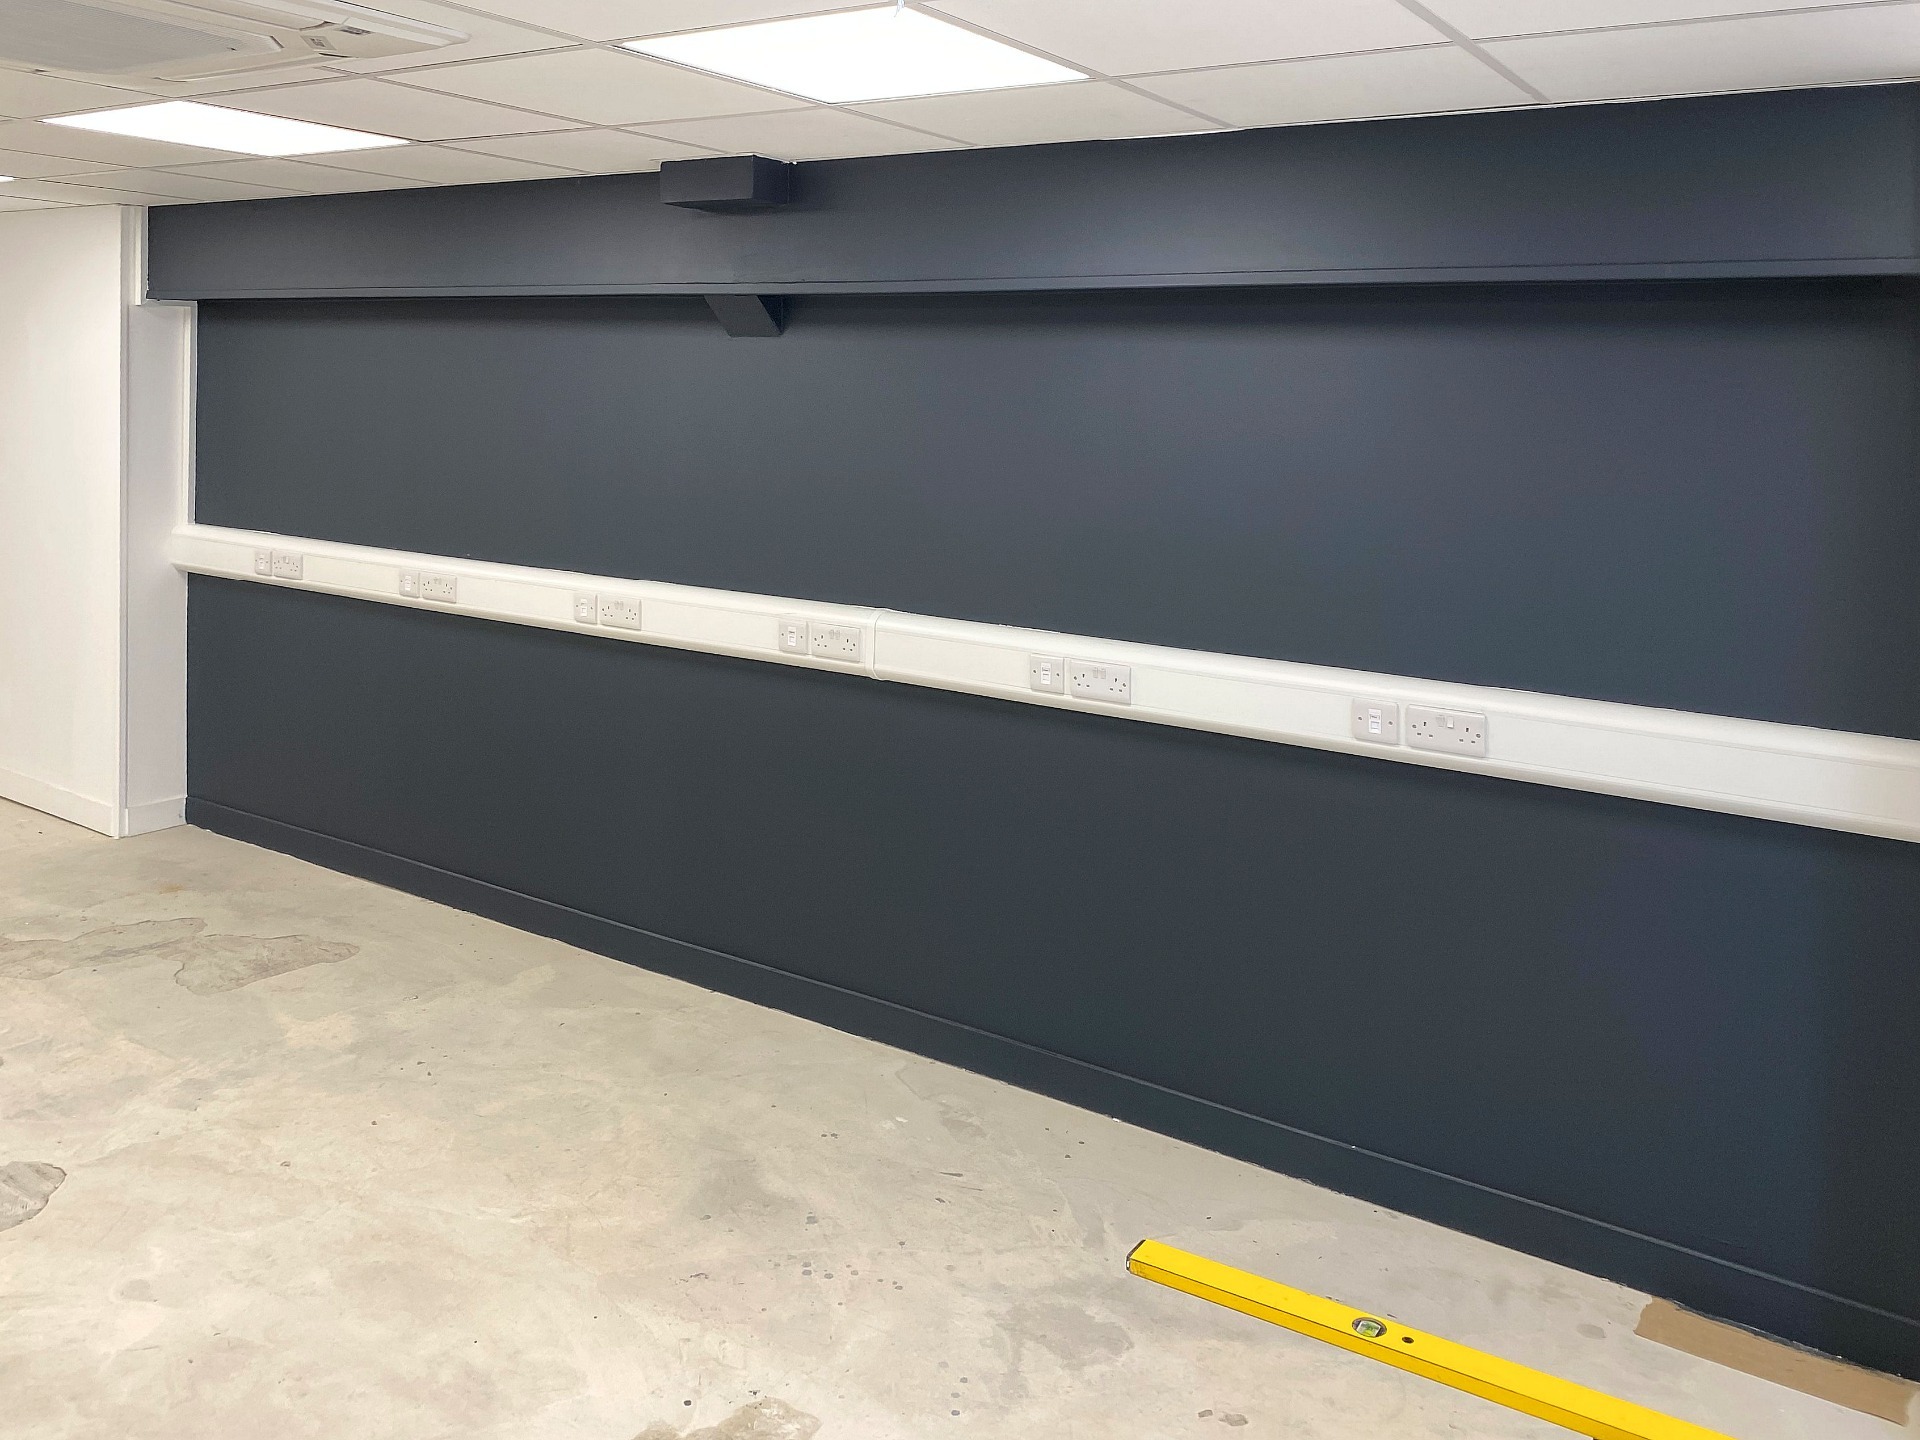 Shop Refurbishment, Dado trunking for electrical and date with future wall paint Barnstaple North Devon